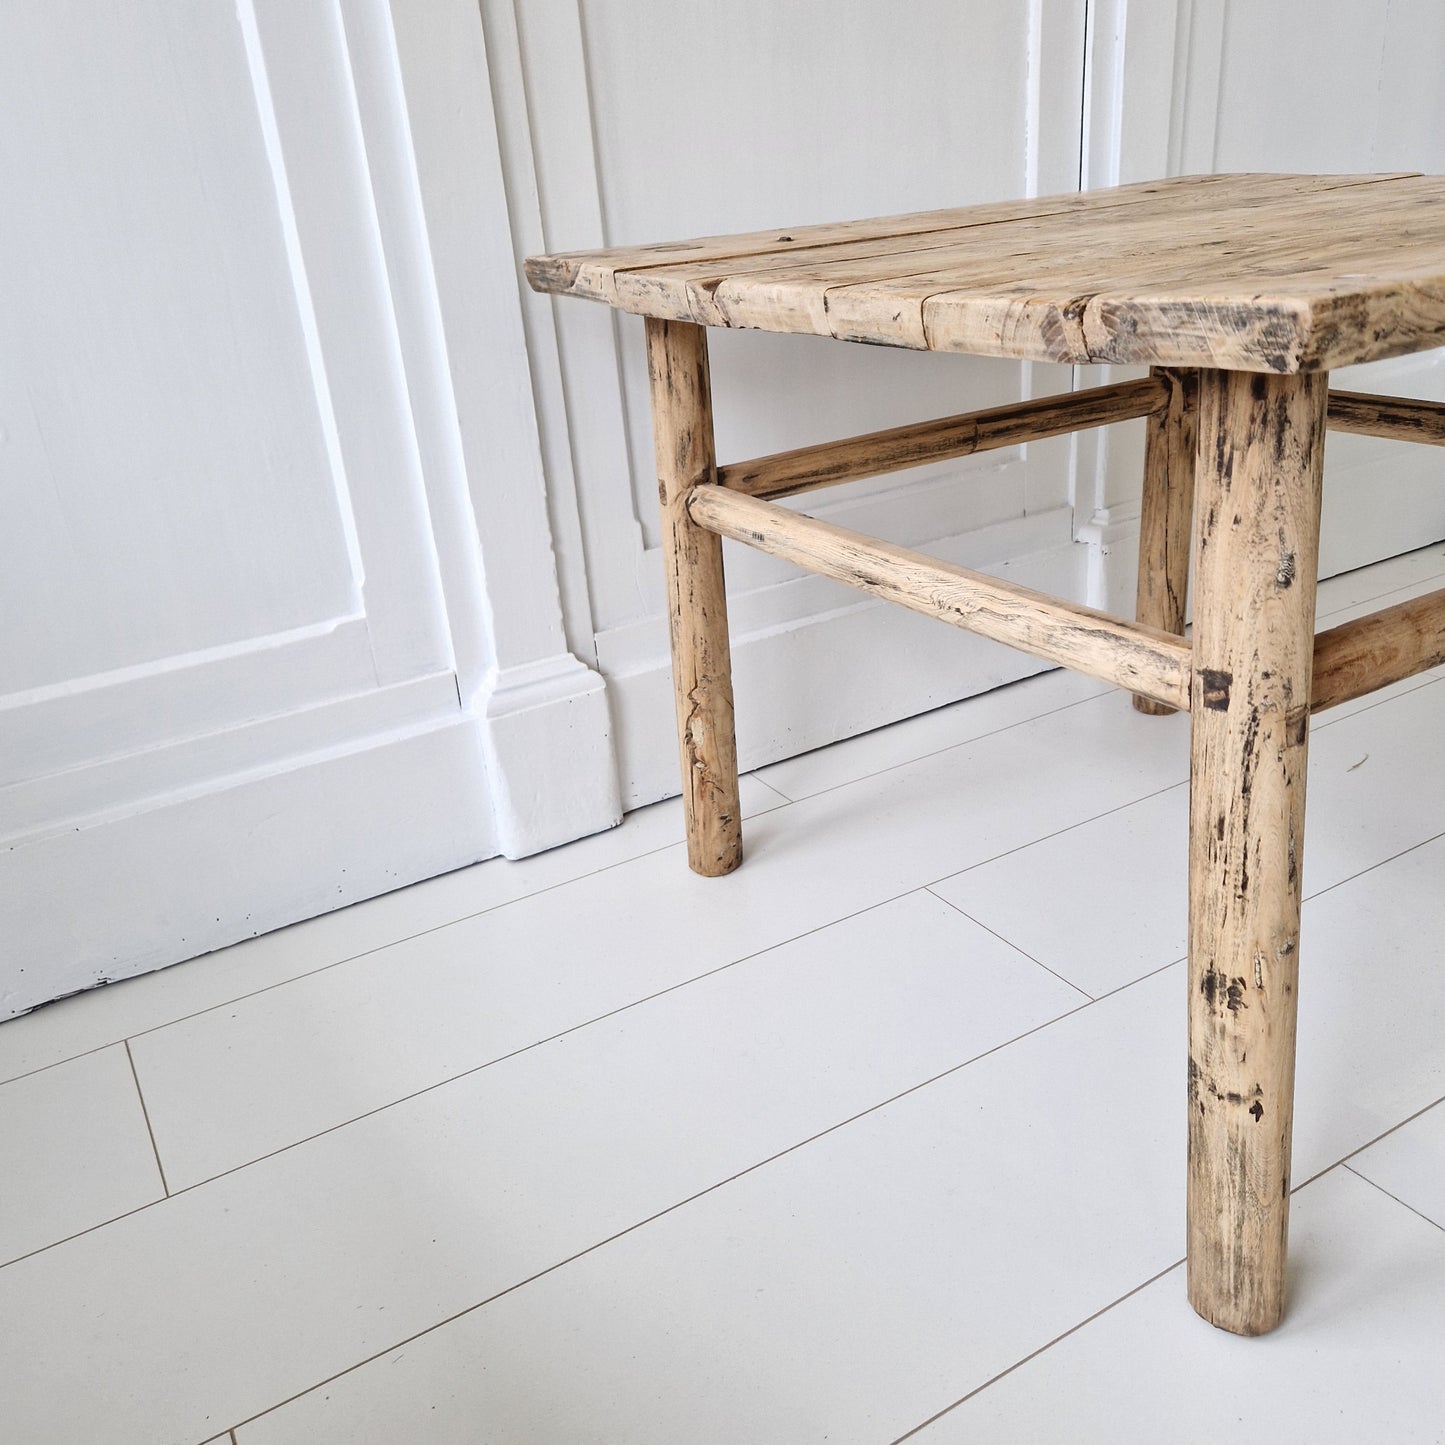 Chinese old wooden table (67x68x51,5cm)